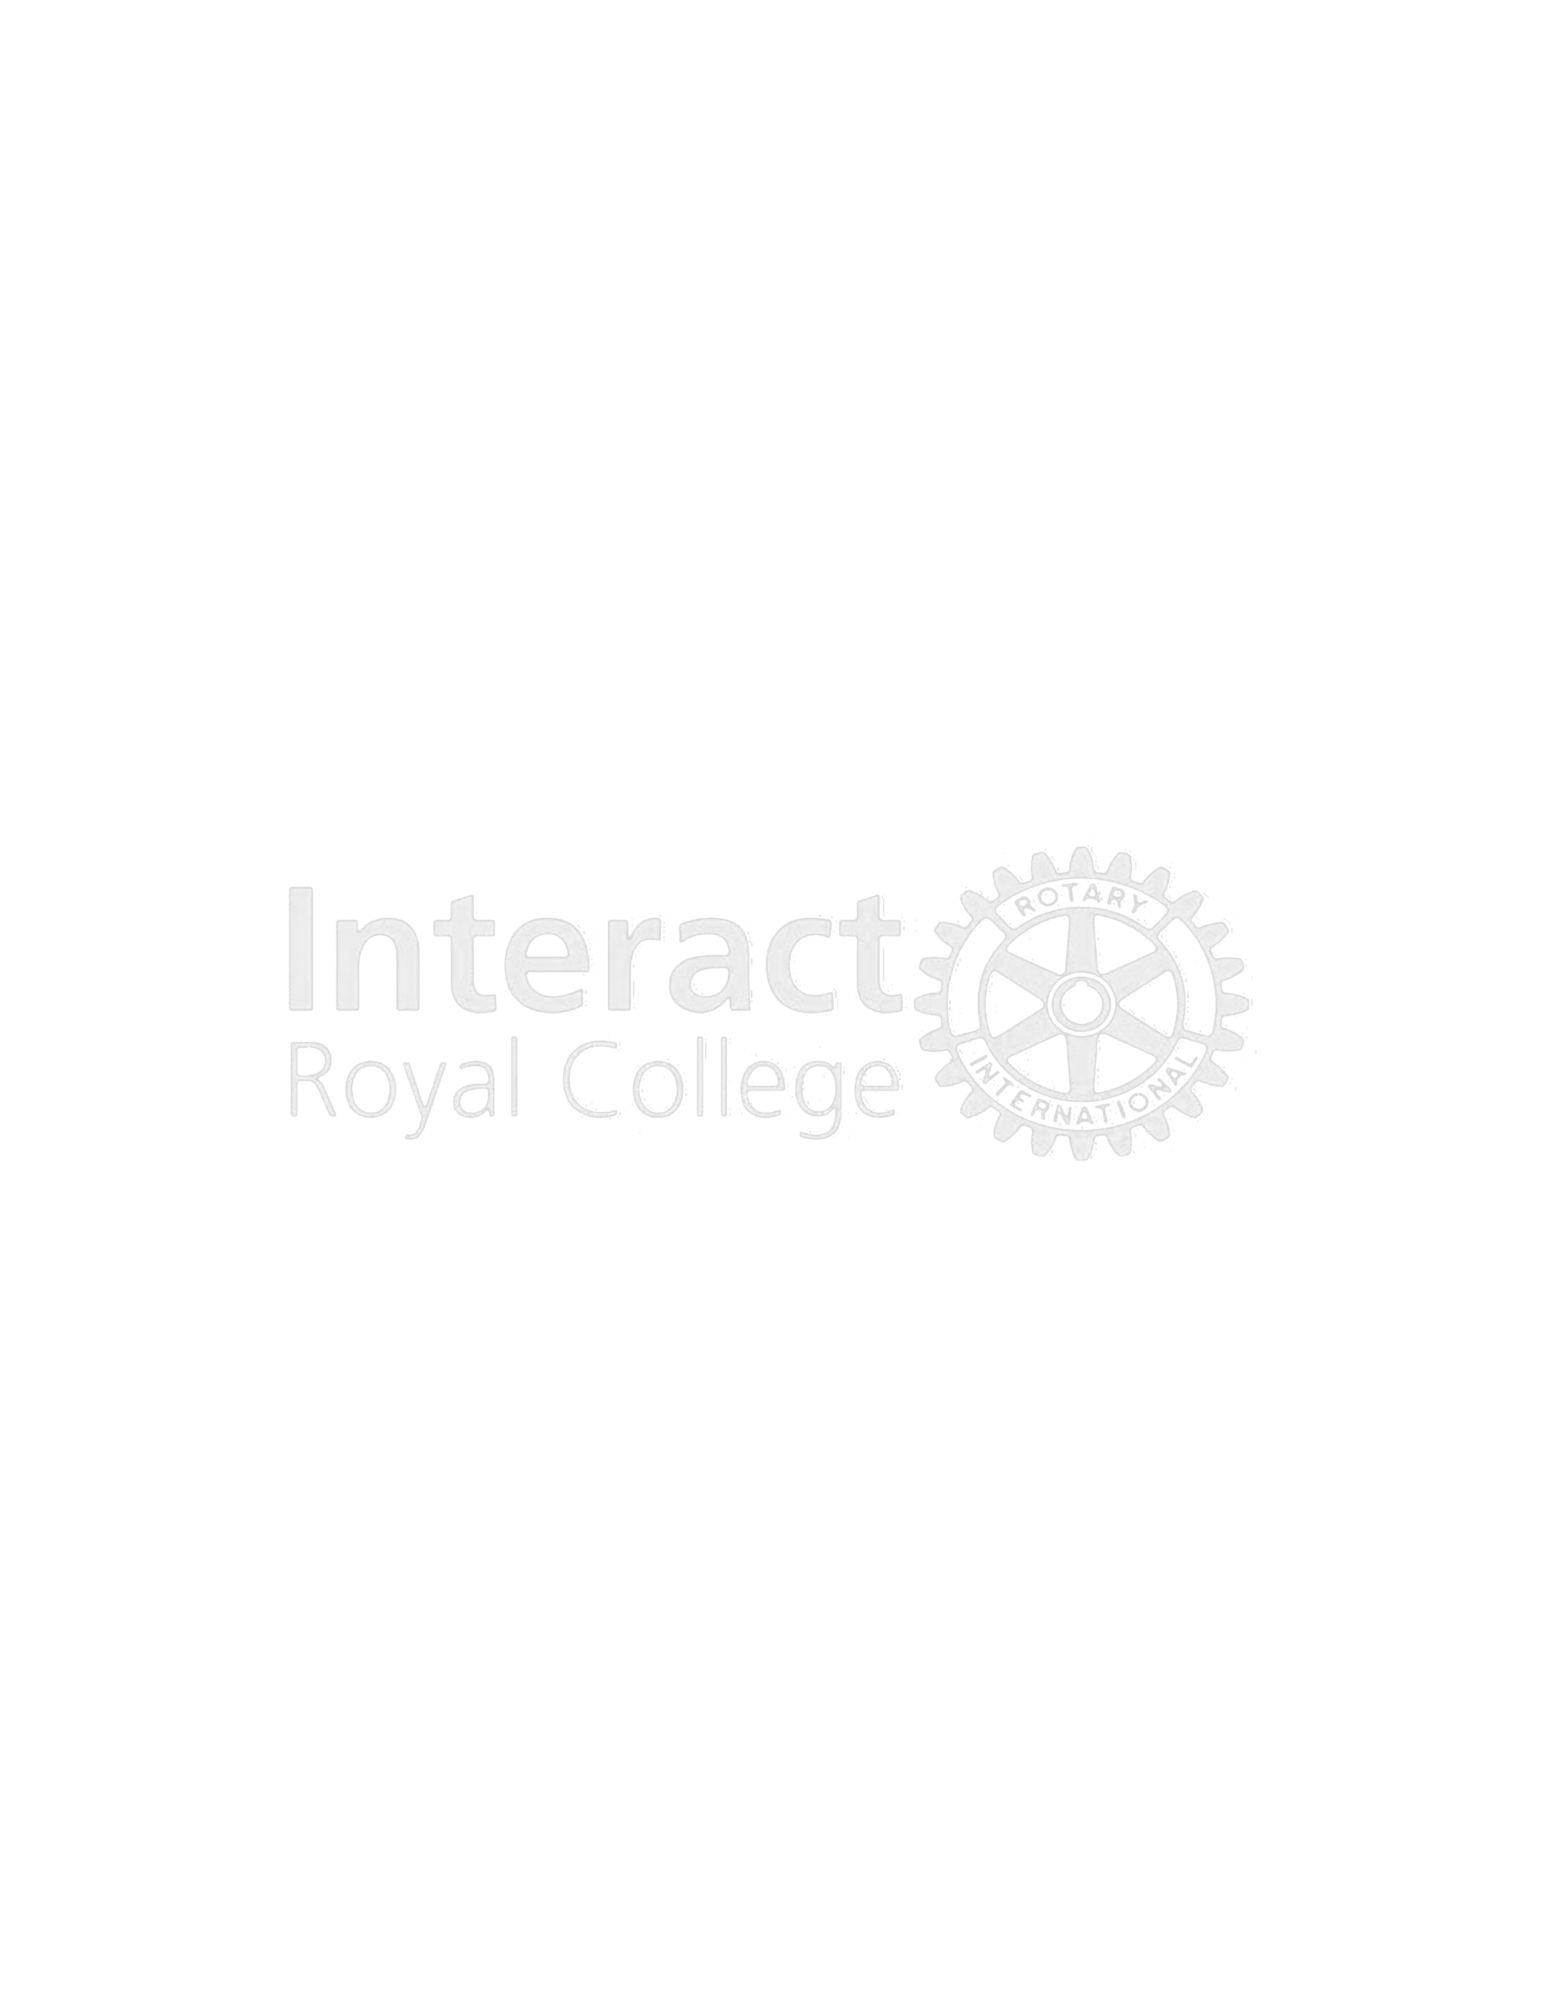 Interact - The Royal College